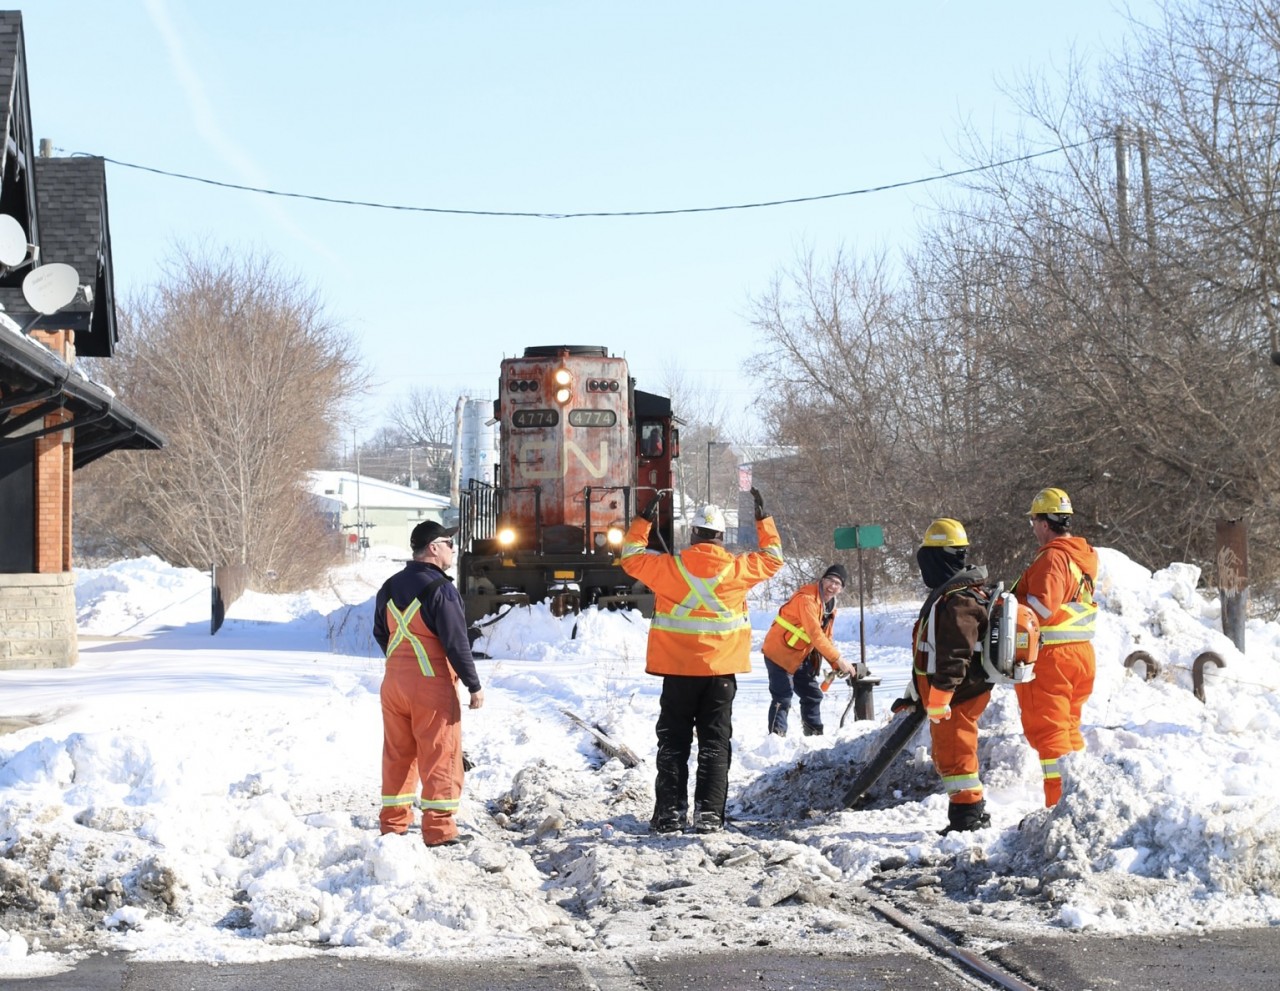 A little winter humour. The clean up crew are making the most of a frustrating day so far after being called out to clear the filled in crossing and switch in front of the old TH&B station in Brantford. The line beyond here was taken out of service when CN convinced the last on line customer to switch to trucks. This day 580 was forced to run around its train here thanks to problems with the switch at the other end of the line. This was most likely the last time a train passed here before this end of the line was abandoned. Today sadly only the old boarded up station remains and another section of interesting rails are gone from Brantford.